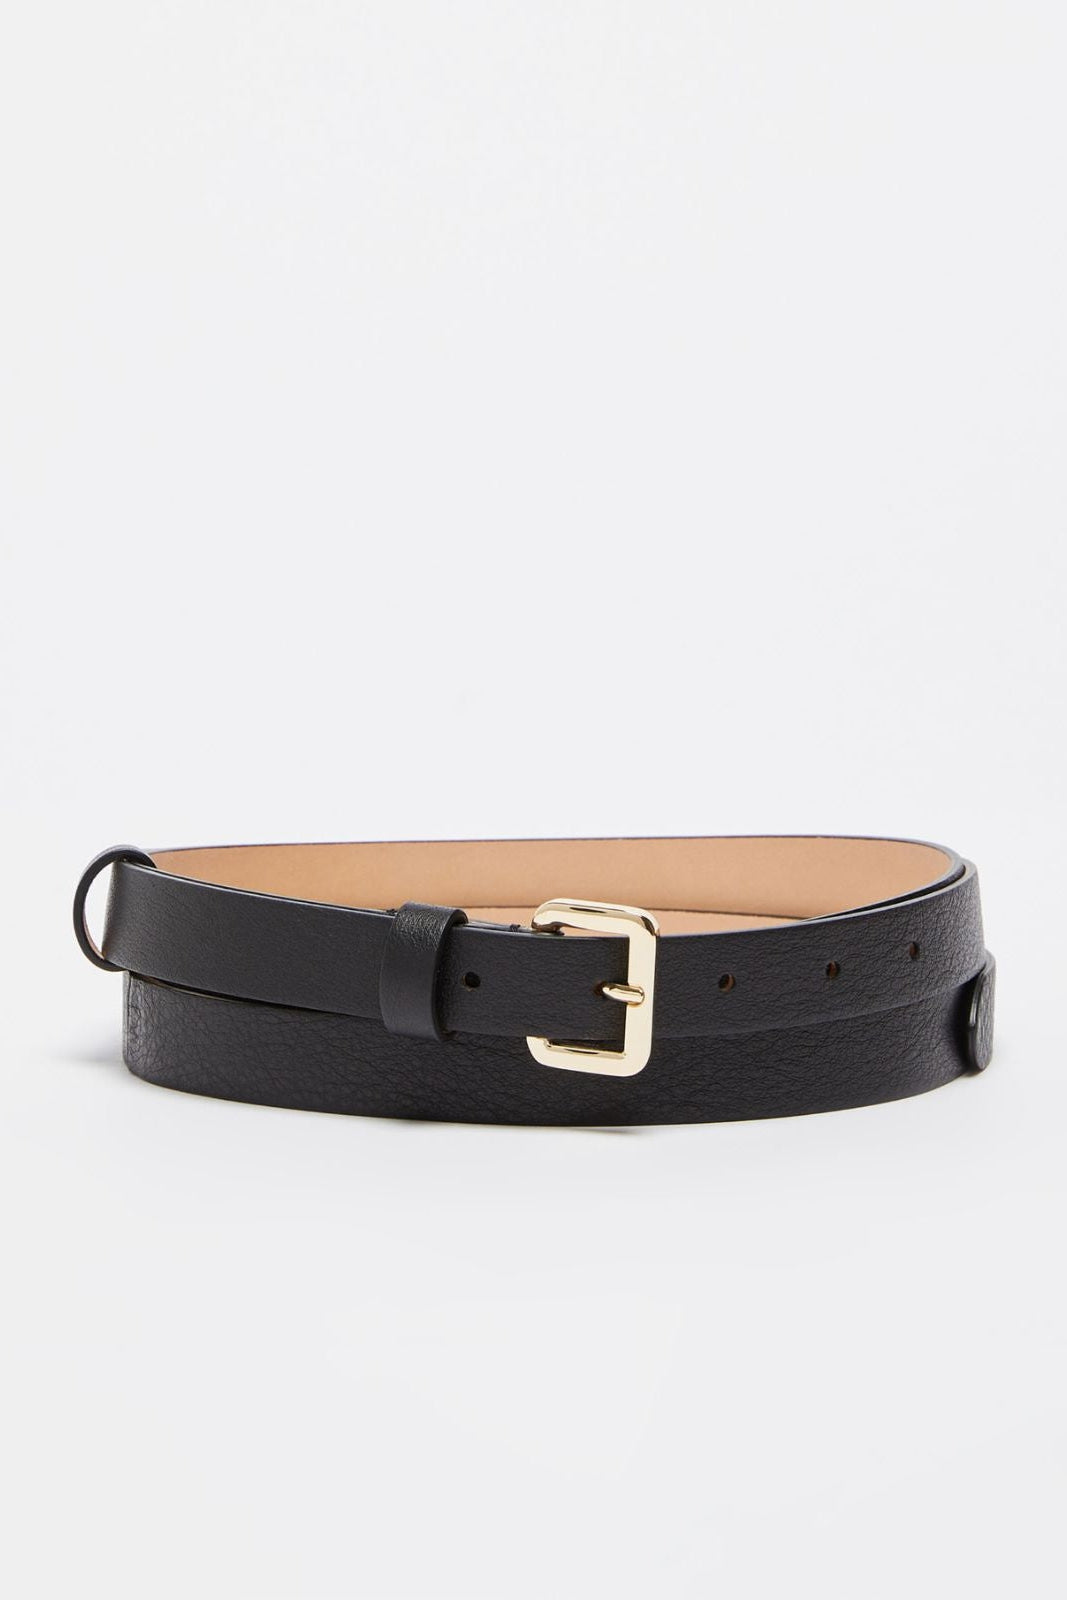 Wrapping Leatherbelt